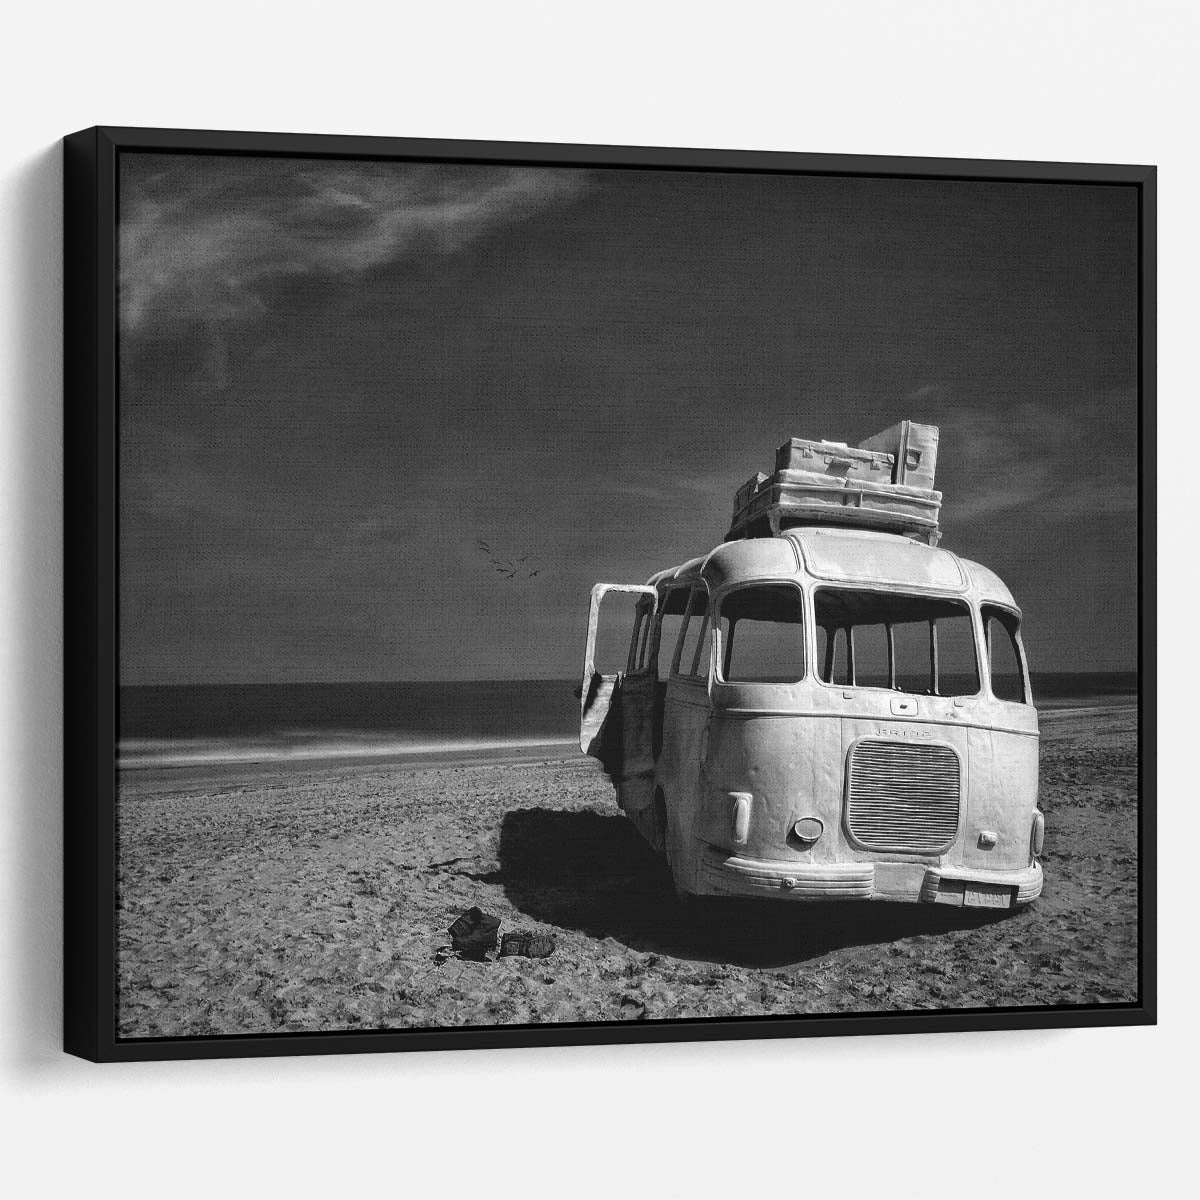 Stranded Bus on Belgian Beach BW Wall Art by Luxuriance Designs. Made in USA.